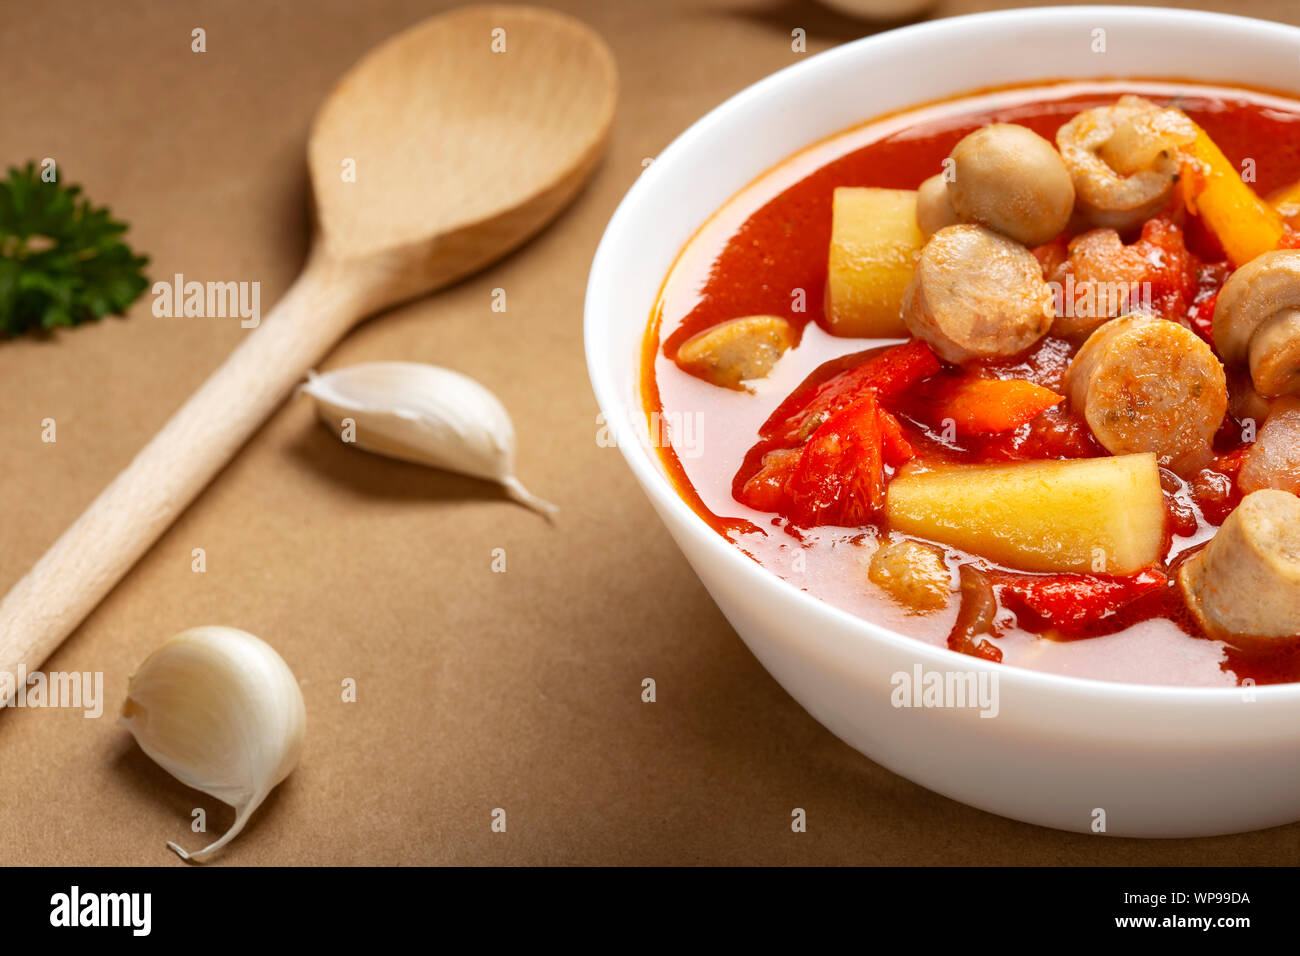 Stew or soup made from vegetables and german sausages in a white bowl Stock Photo